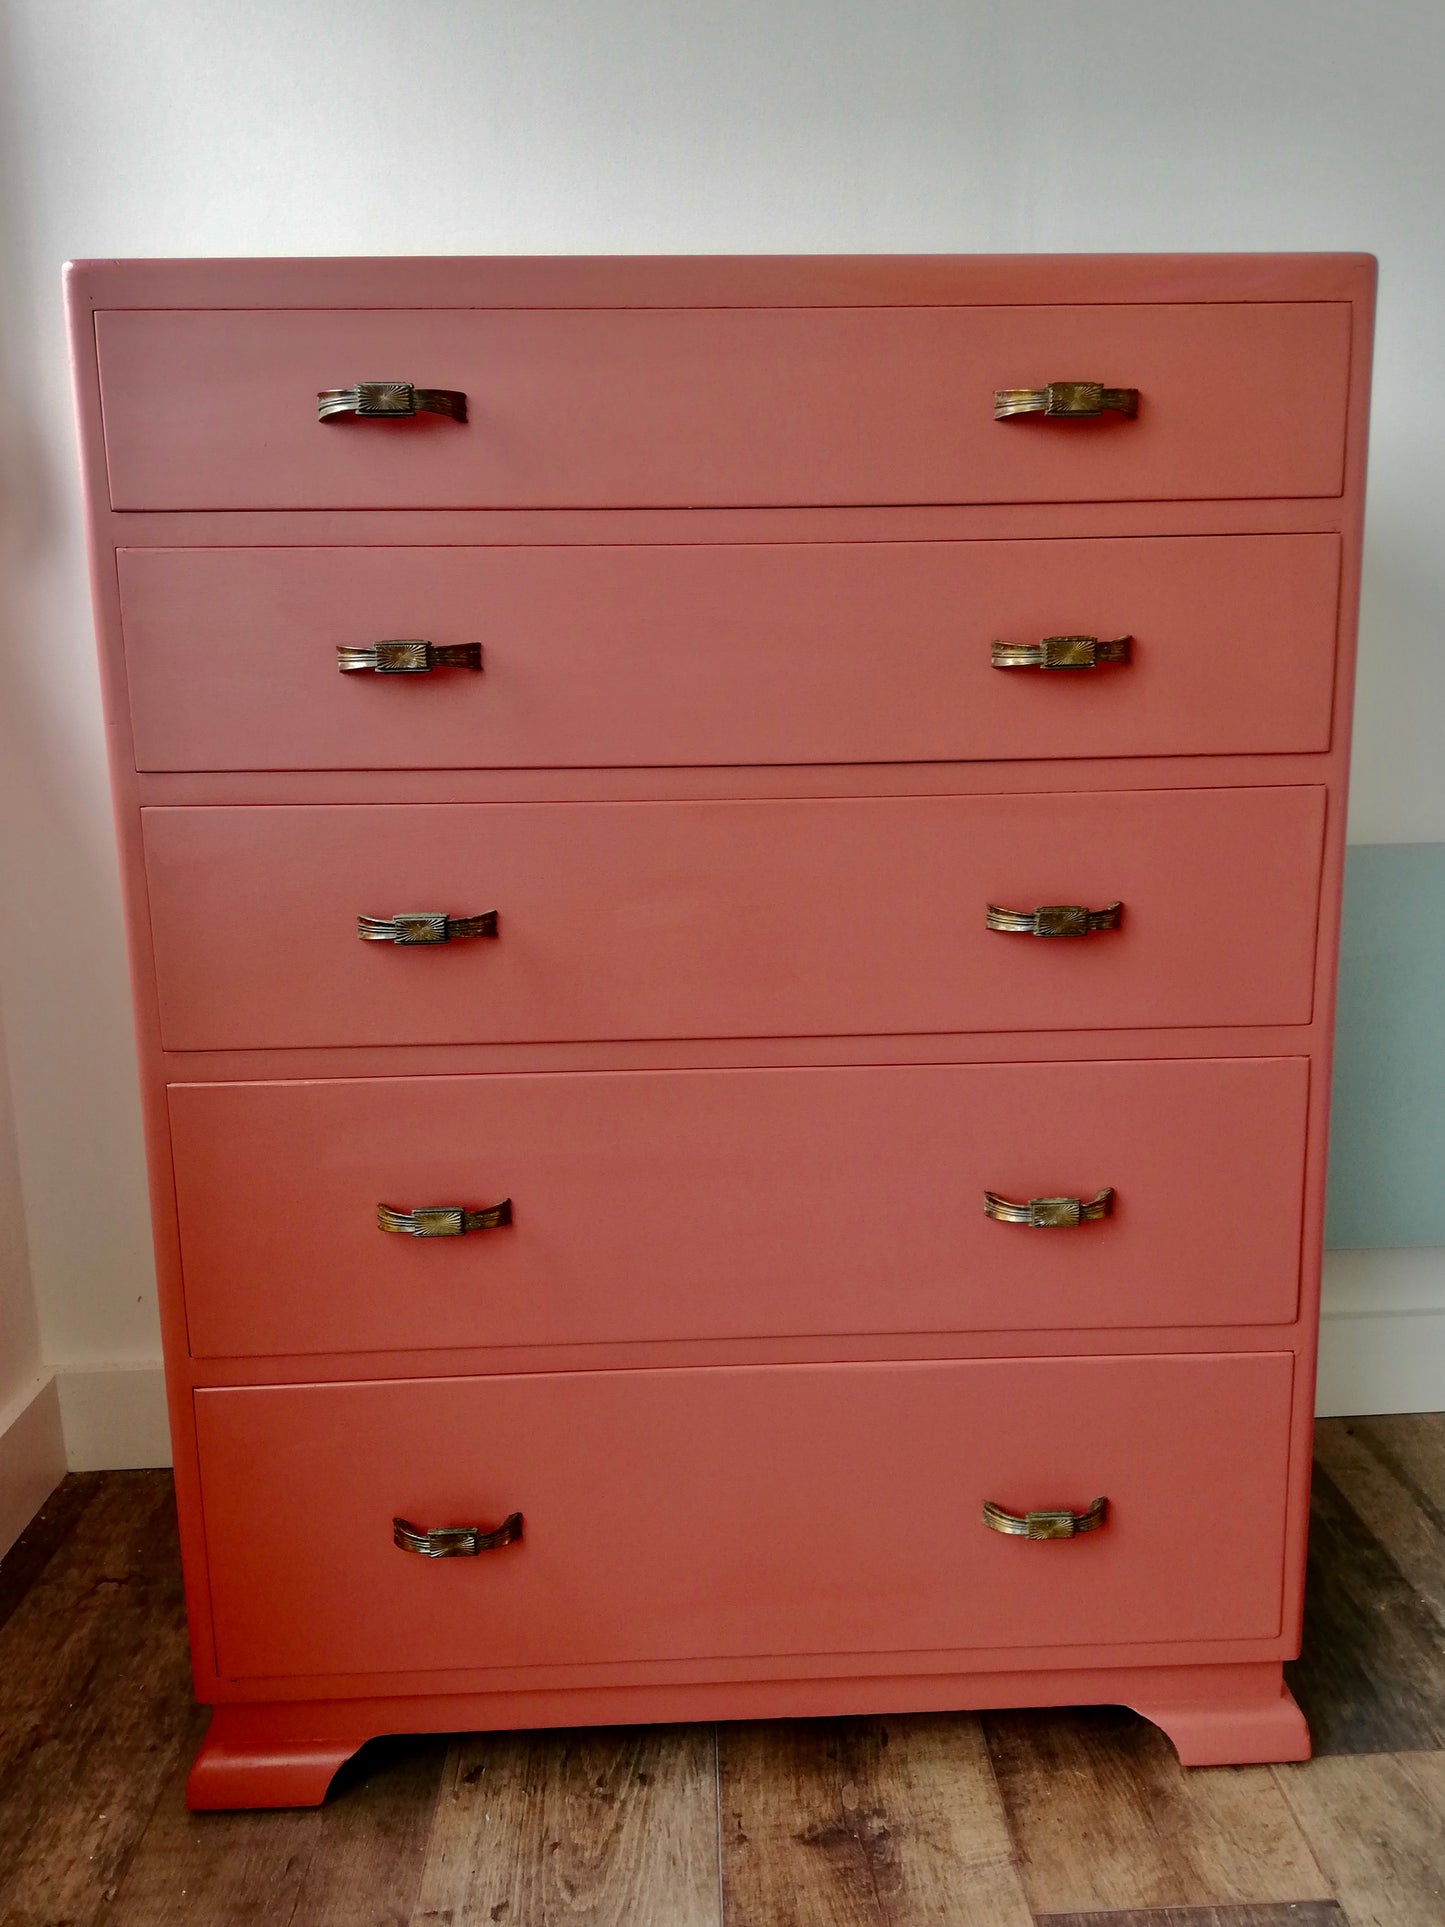 Chest of drawers for Kirsty